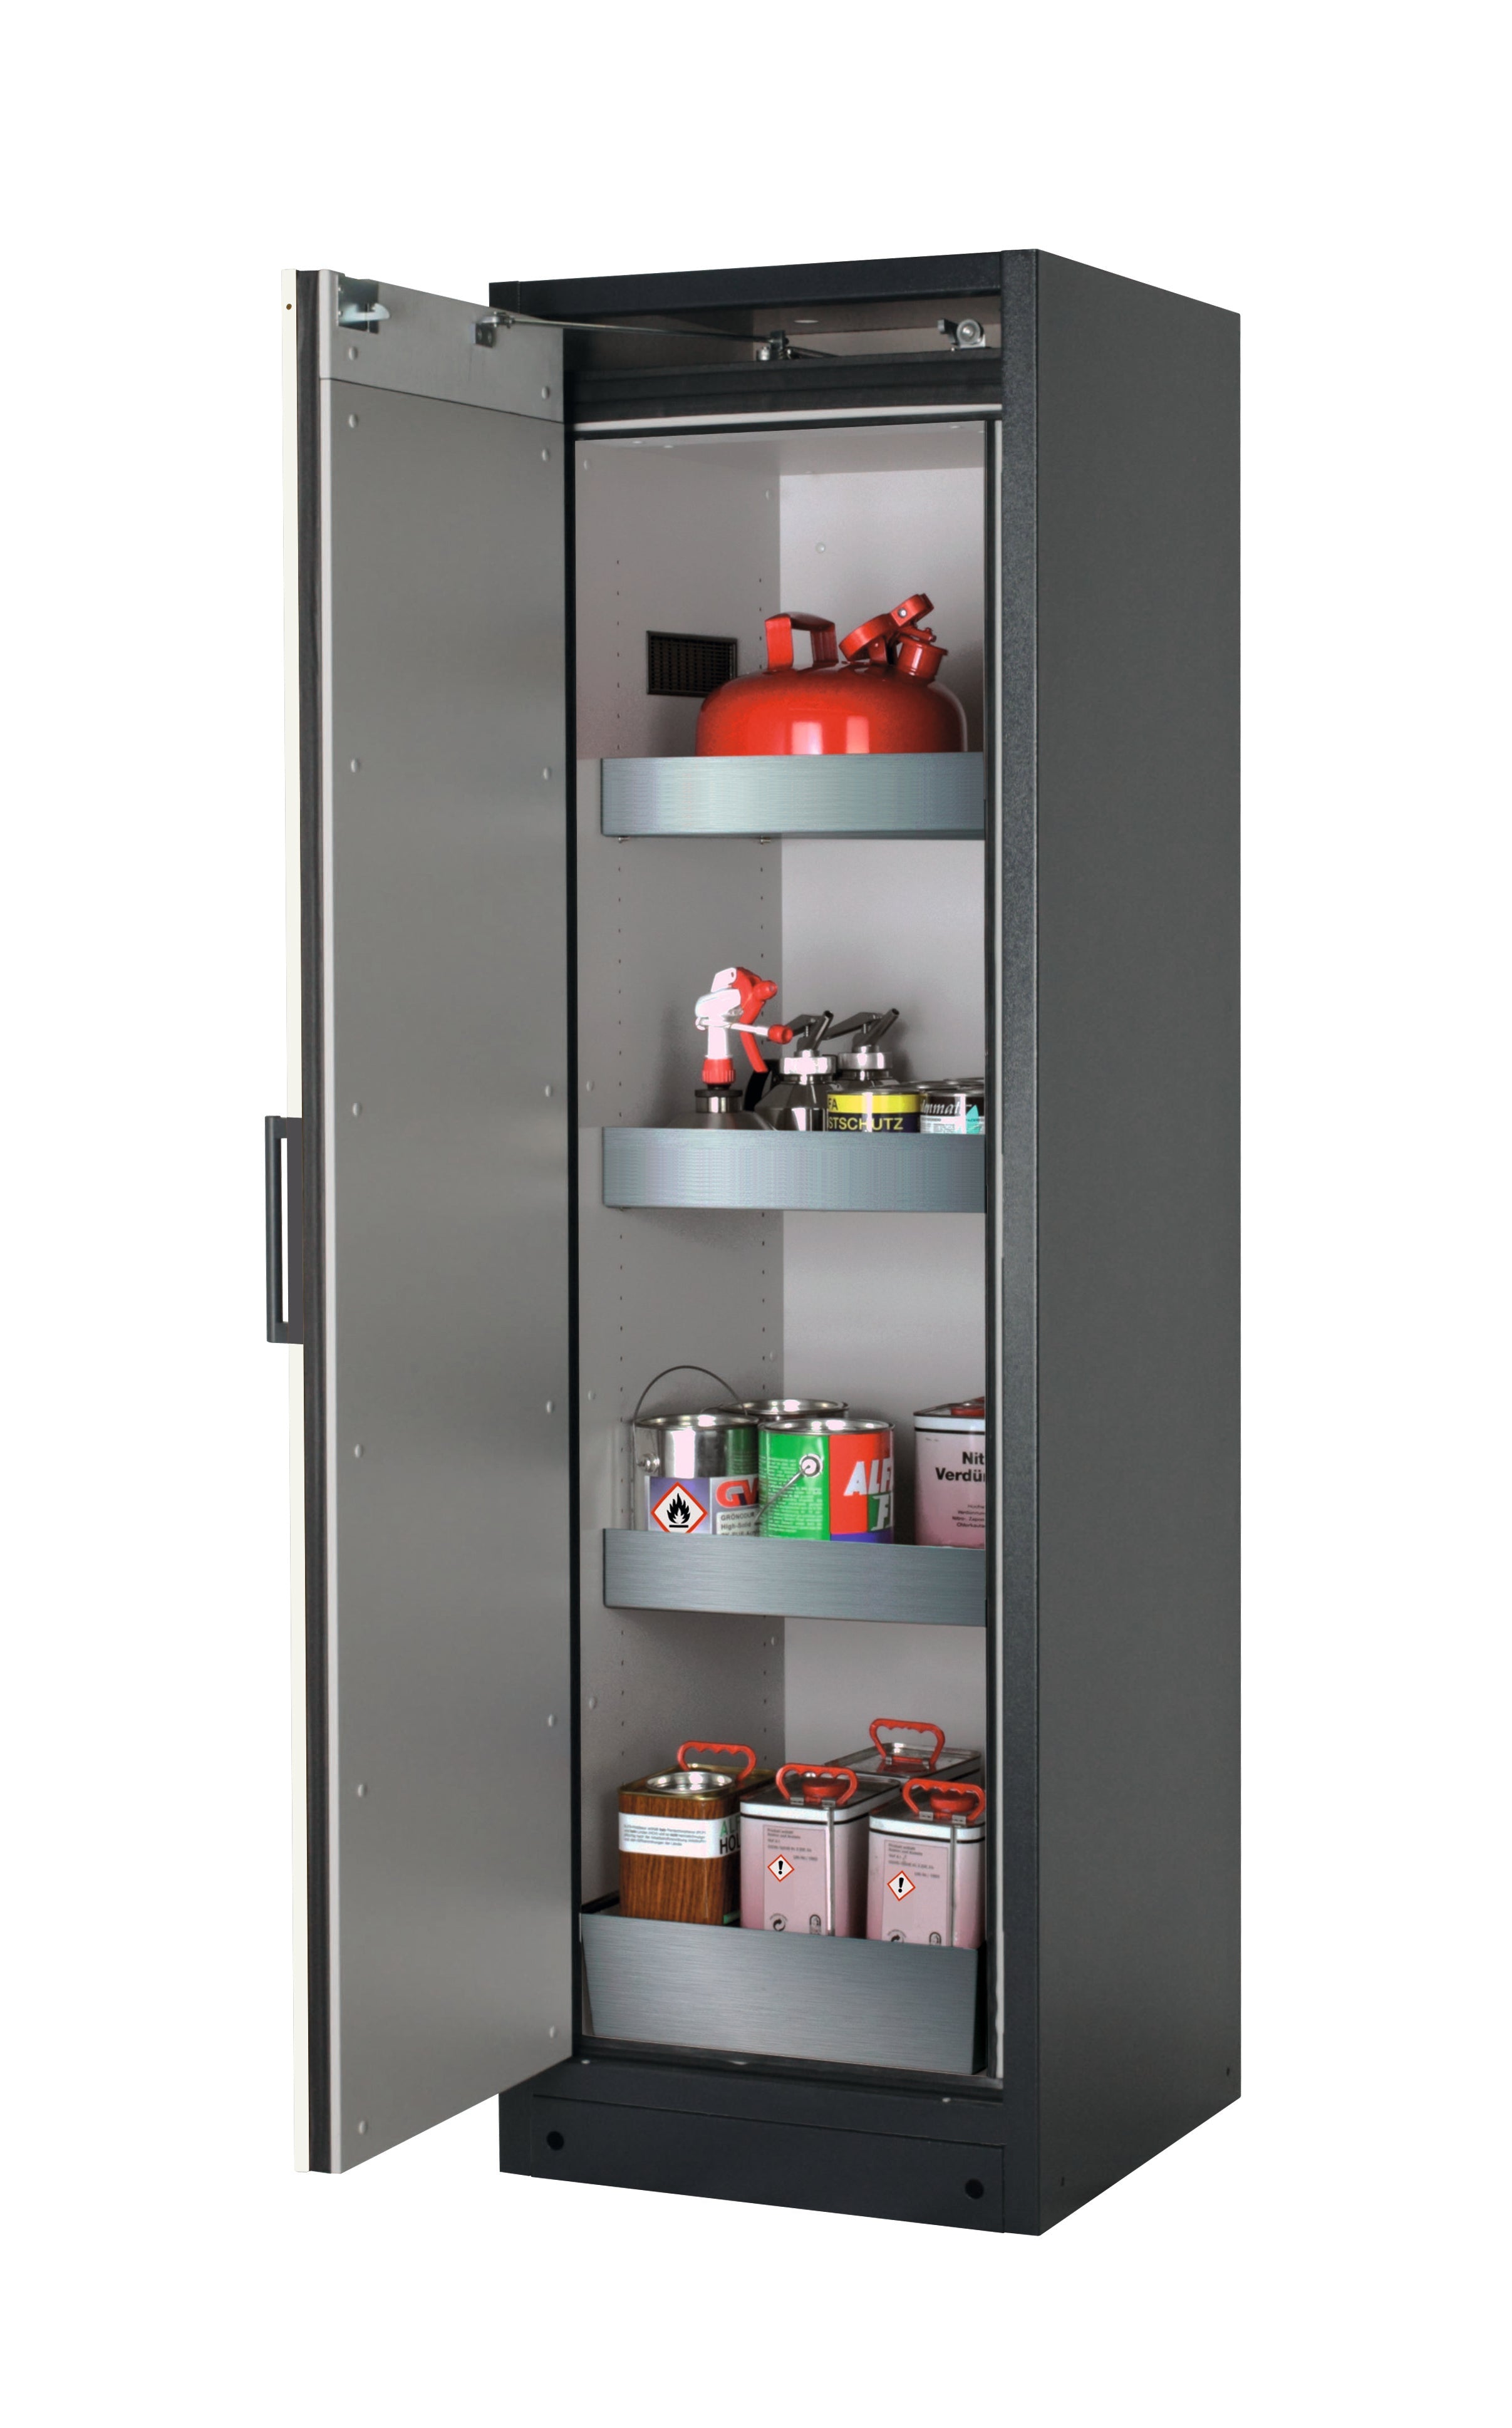 Type 90 safety storage cabinet Q-CLASSIC-90 model Q90.195.060 in asecos silver with 3x tray shelf (standard) (stainless steel 1.4301),